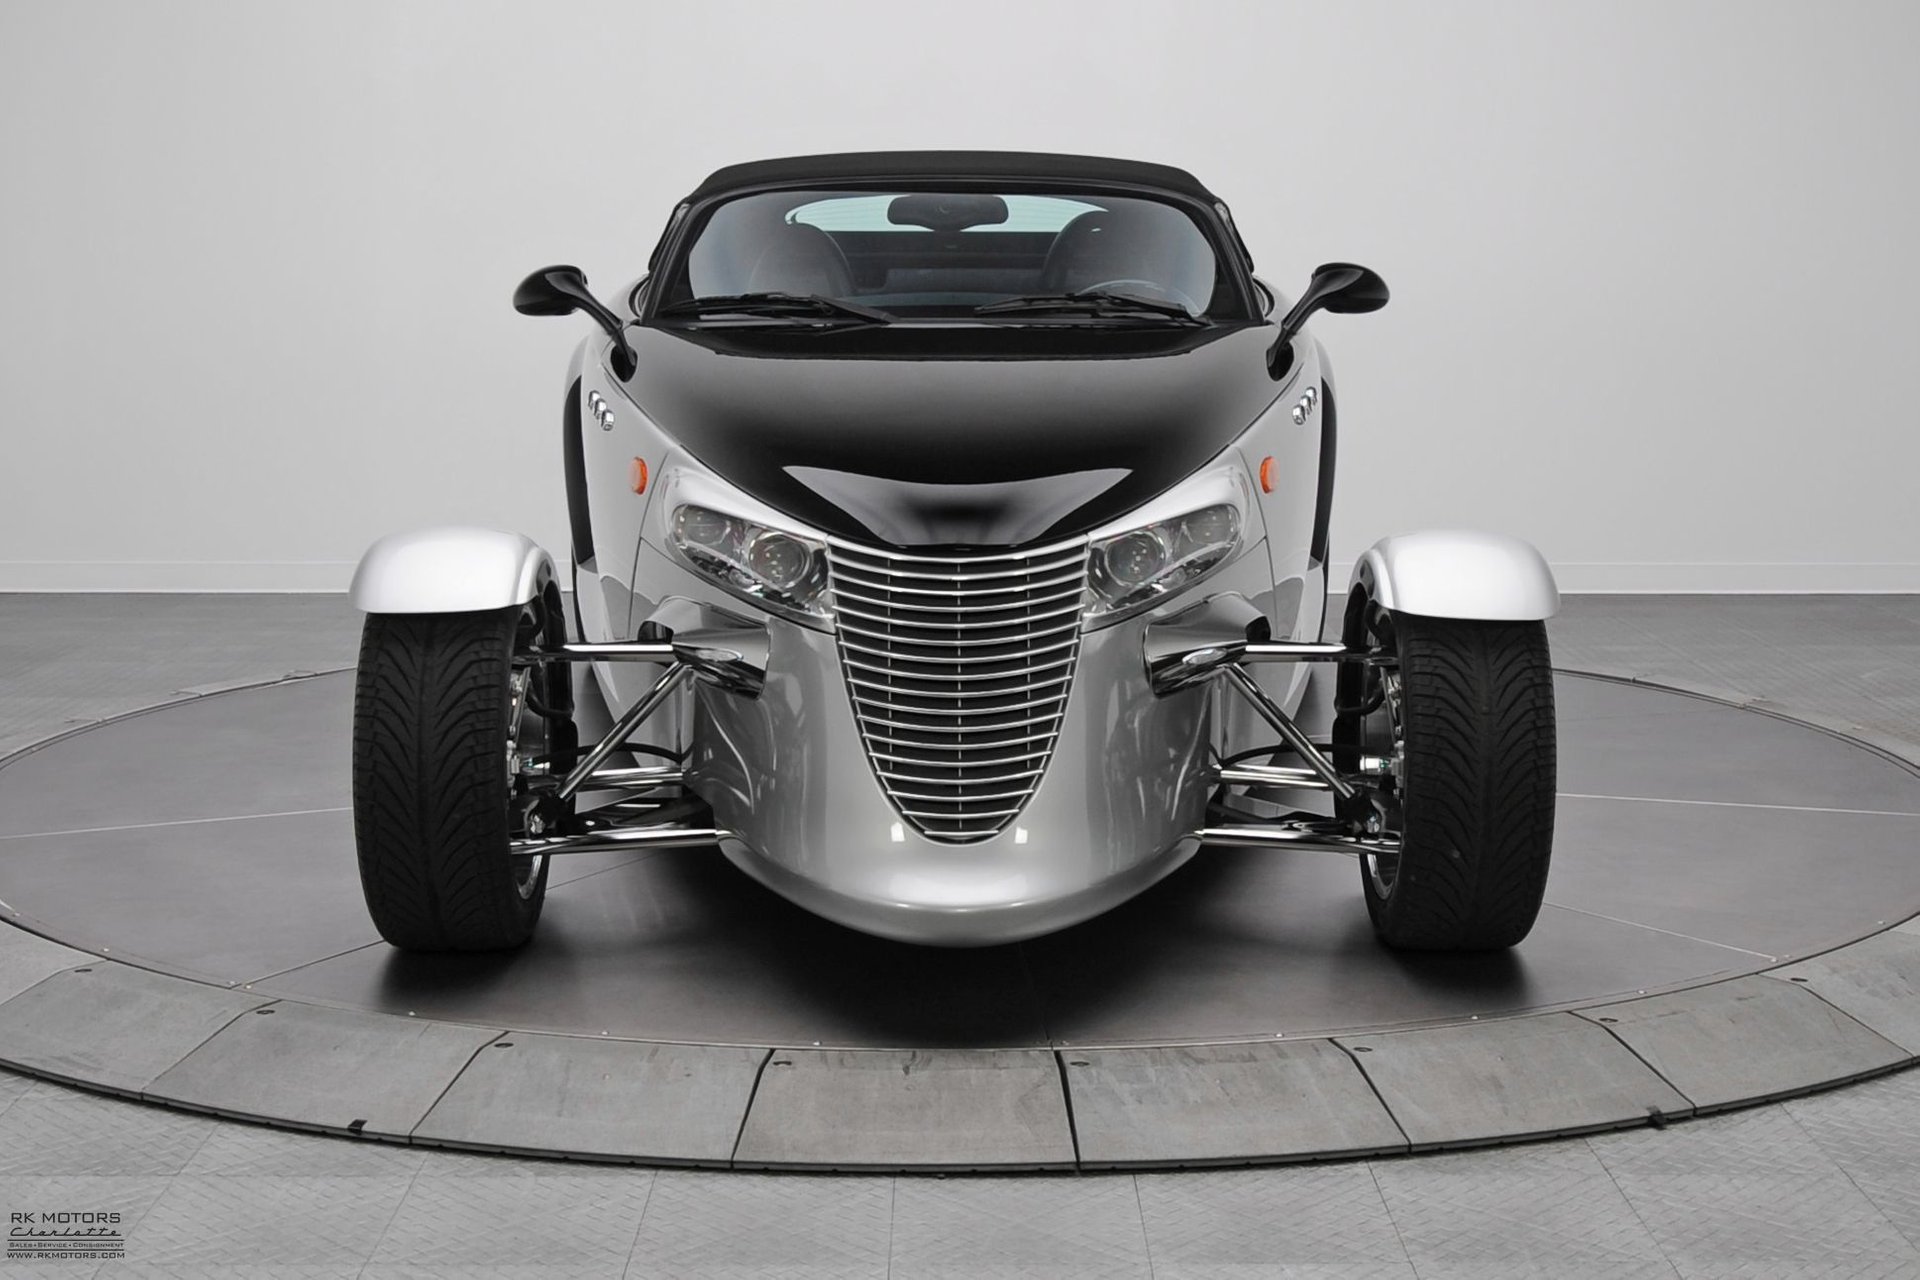 For Sale 2000 Plymouth Prowler